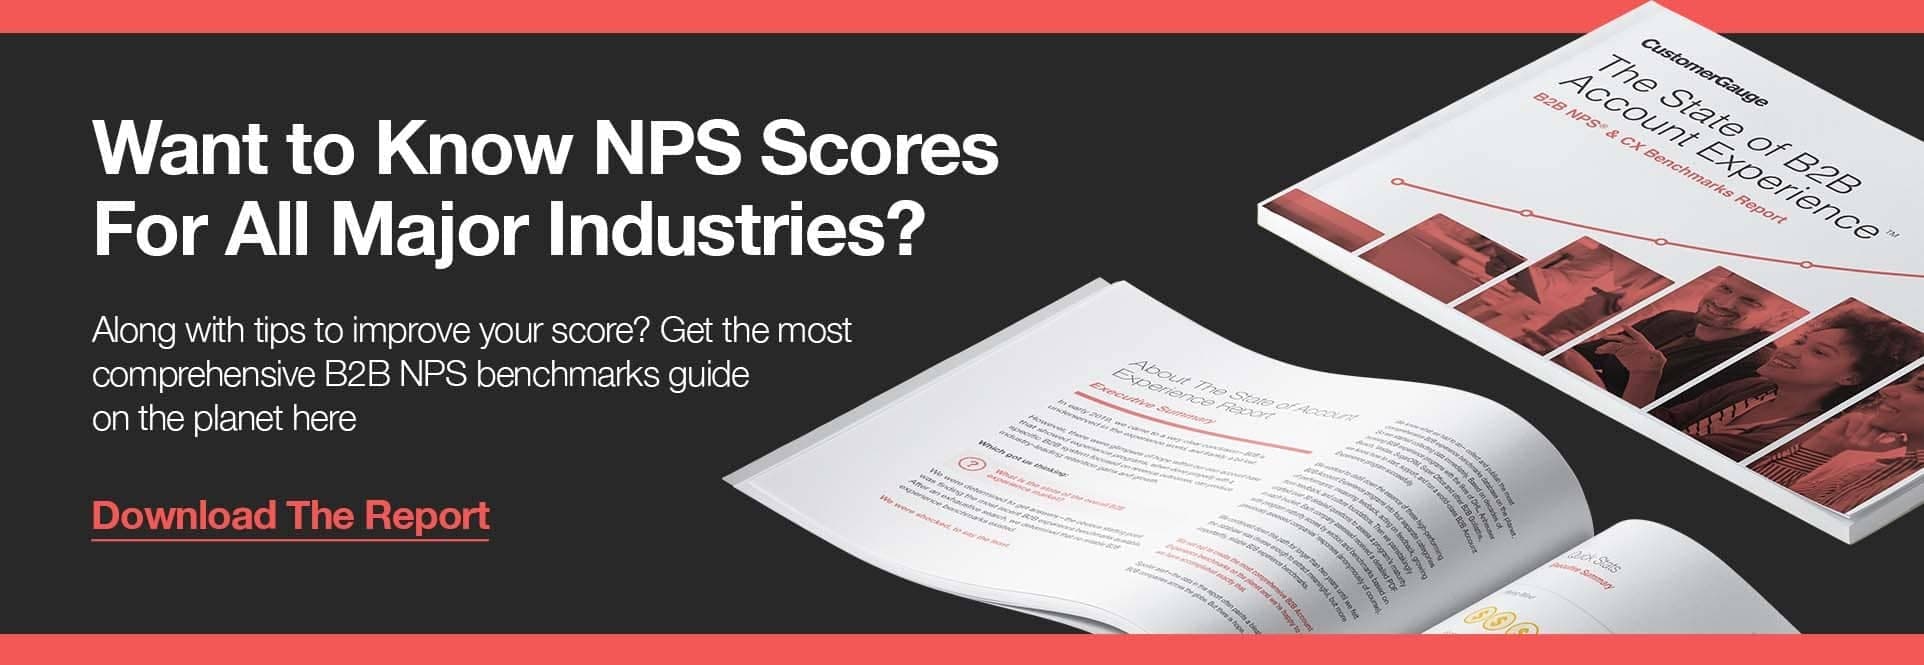 NPS benchmarks book